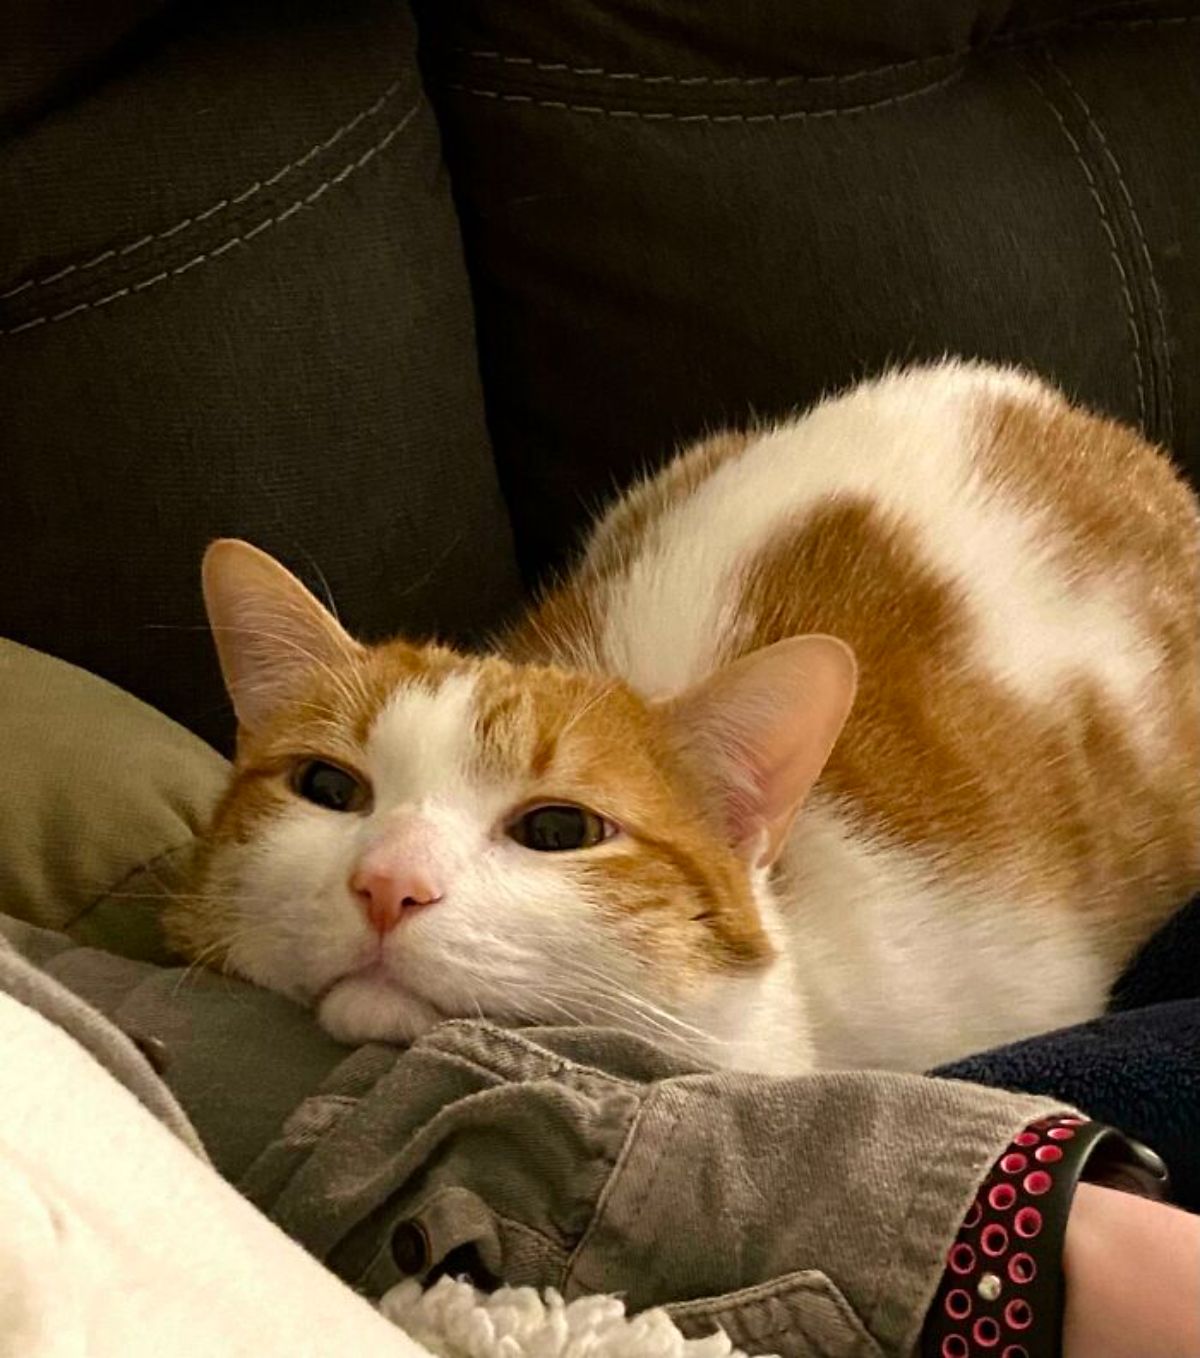 orange and white cat laying on someone's arm and looking up lovingly